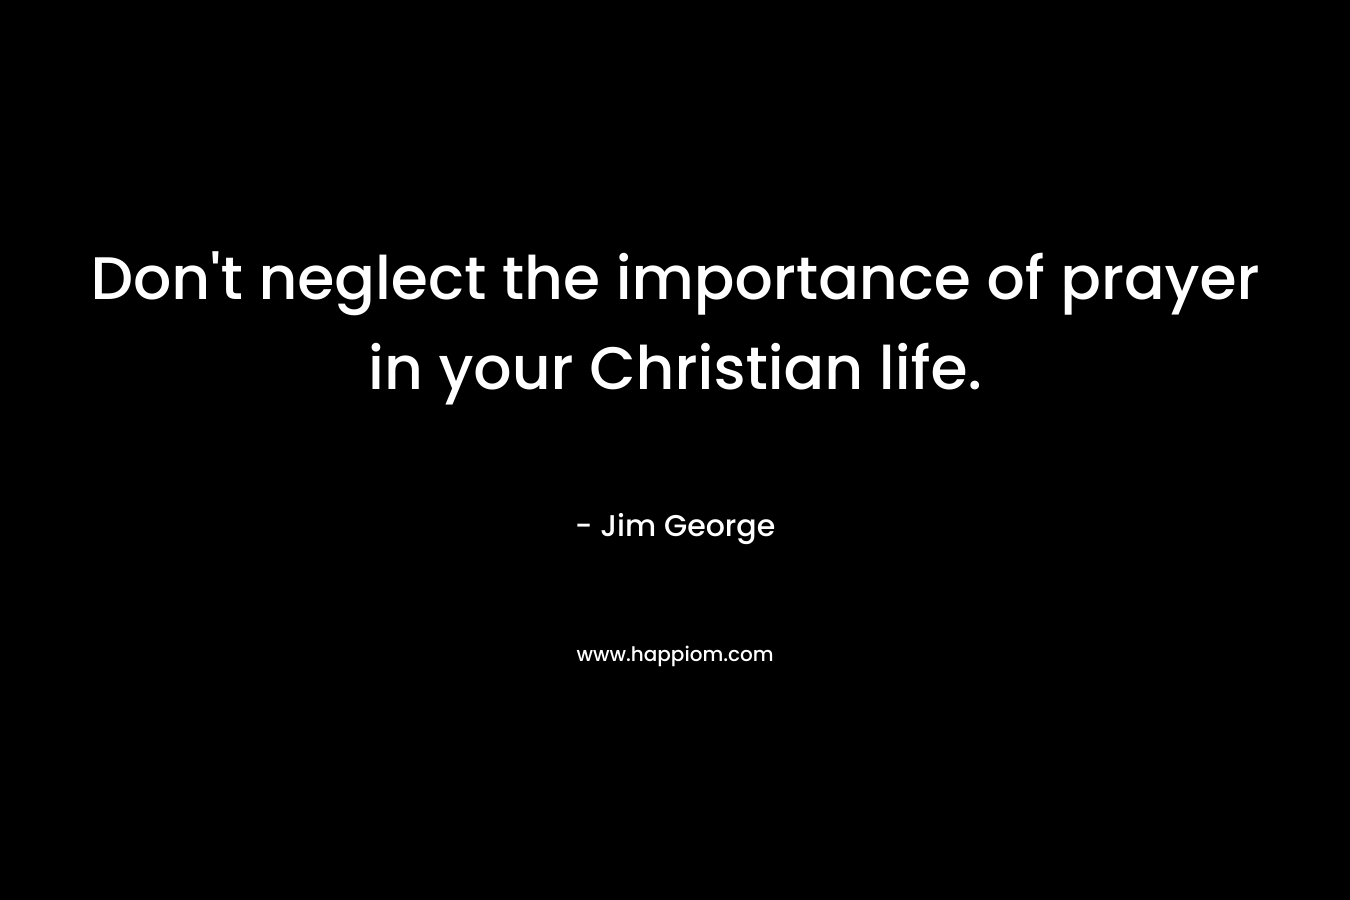 Don't neglect the importance of prayer in your Christian life.